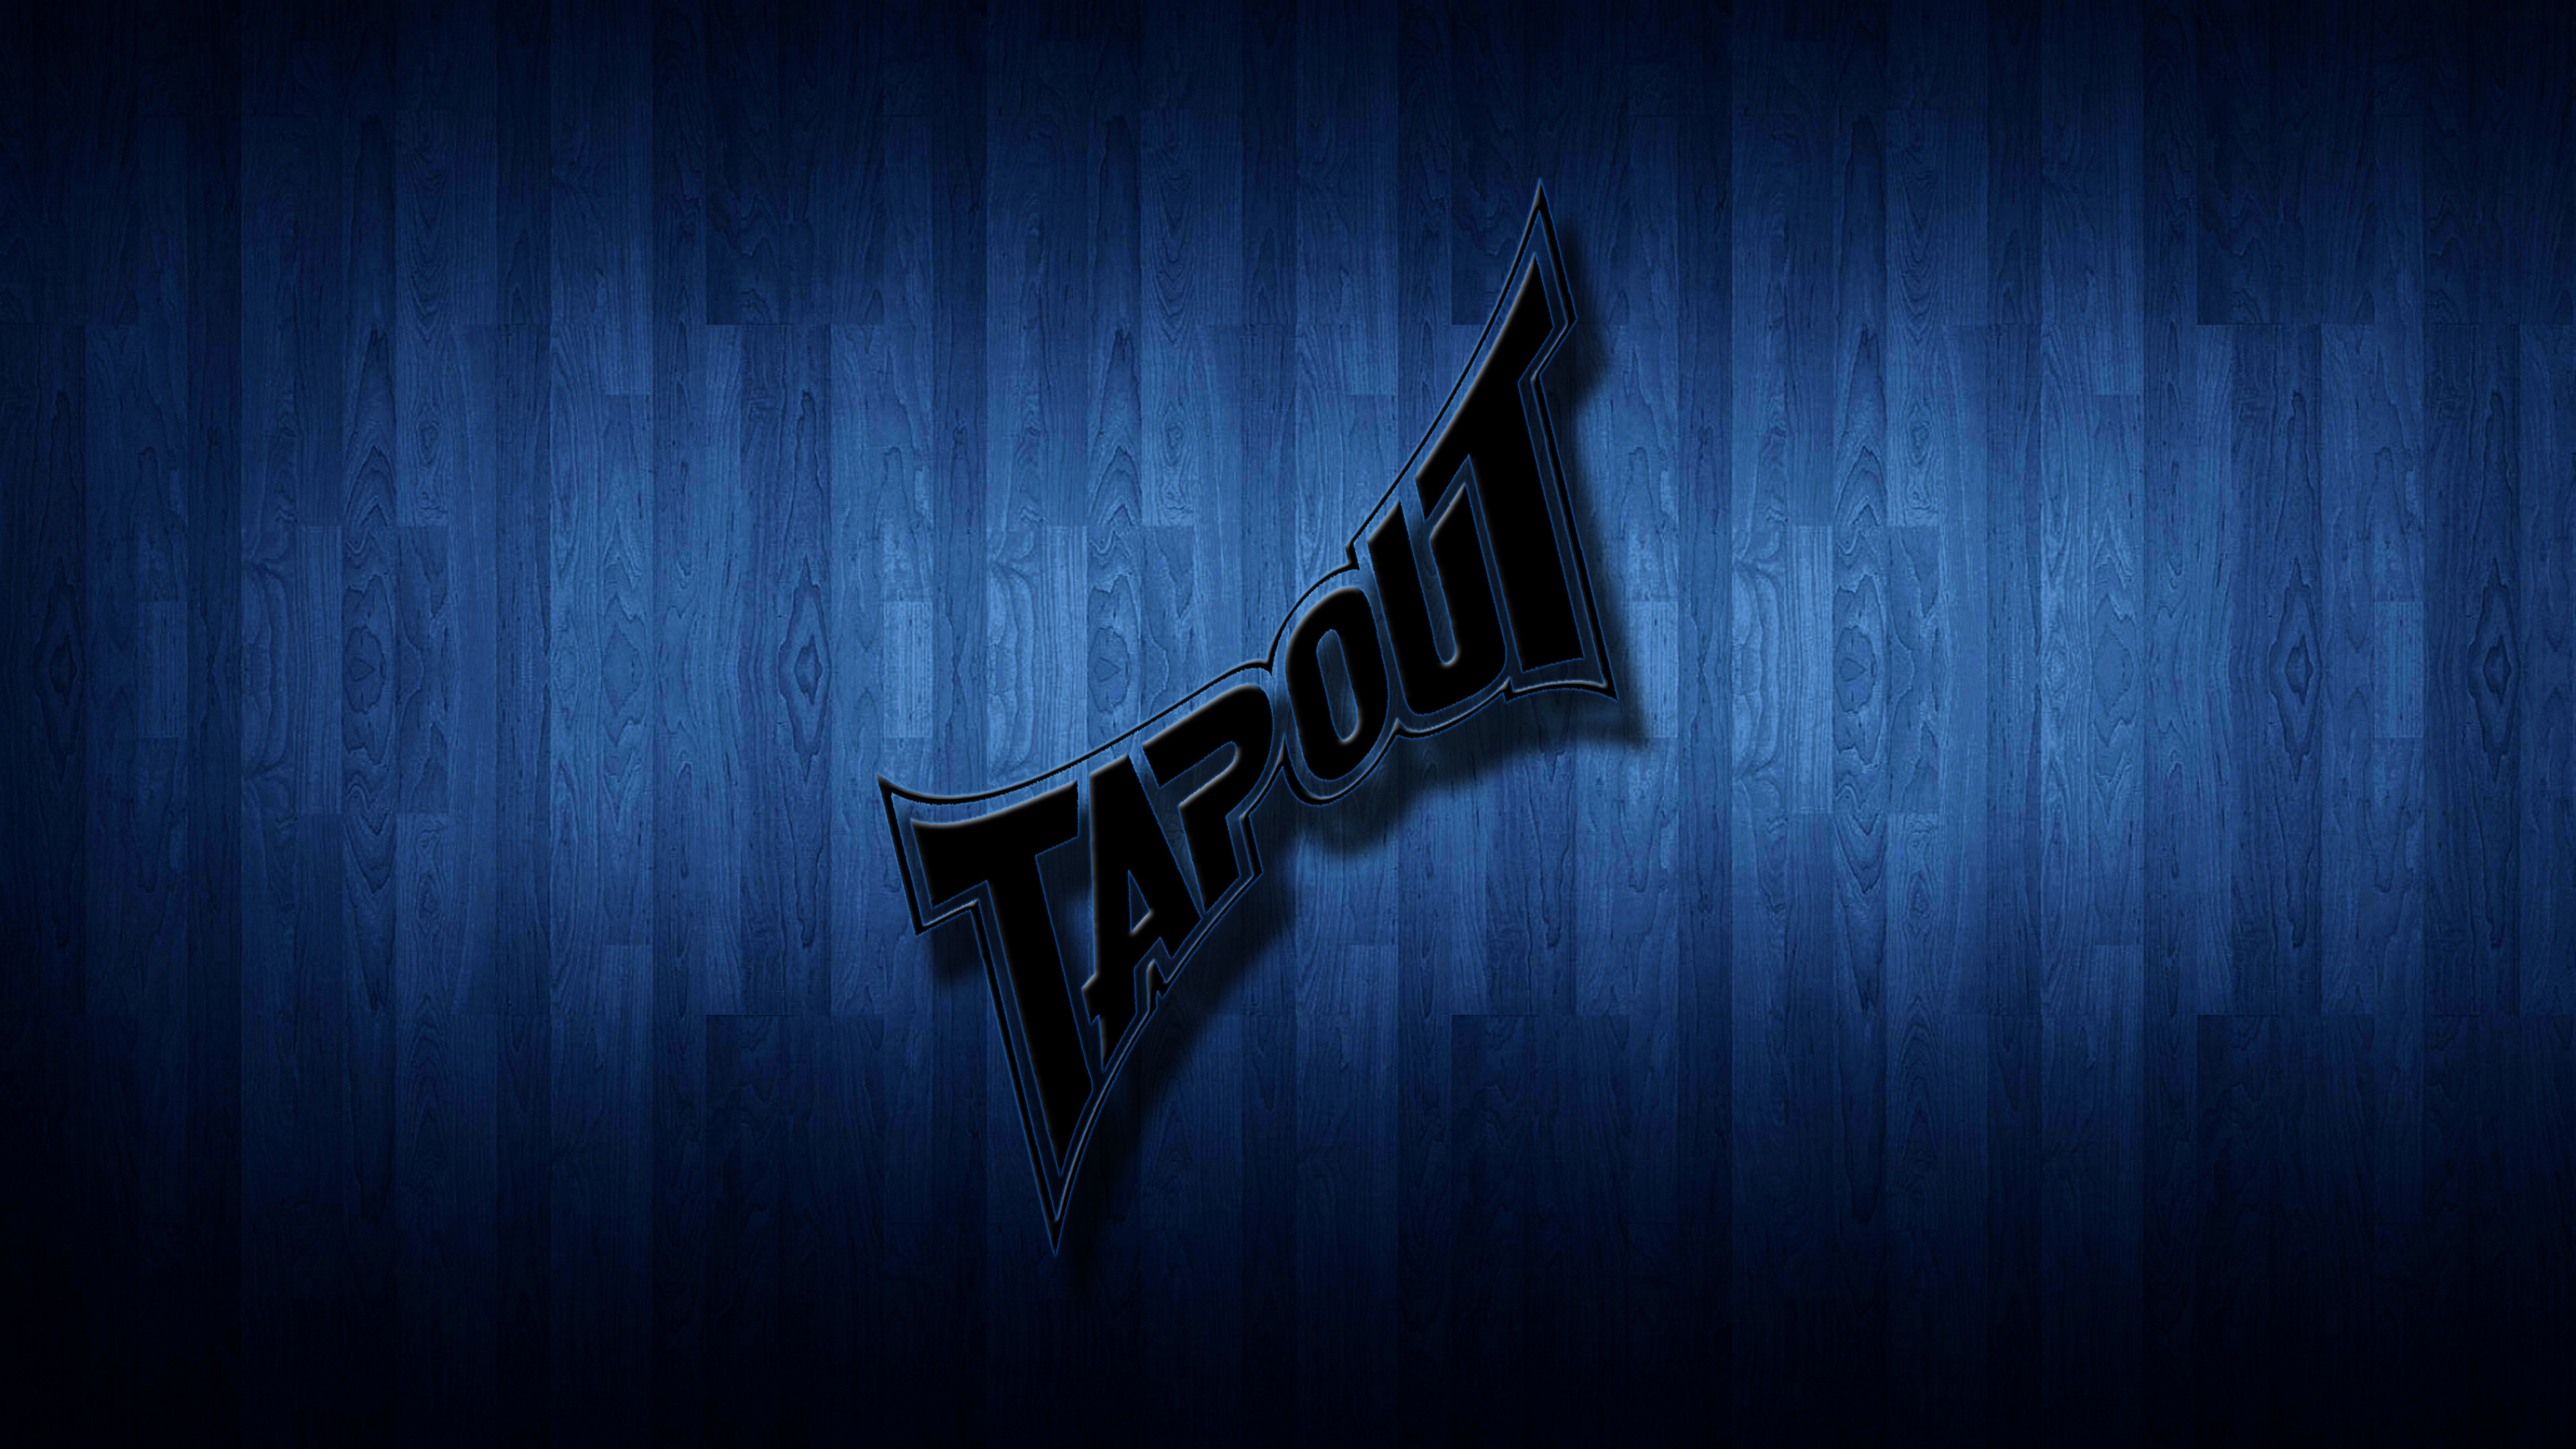 3840x2160 Tapout Blue Wood Background Northern Kreations